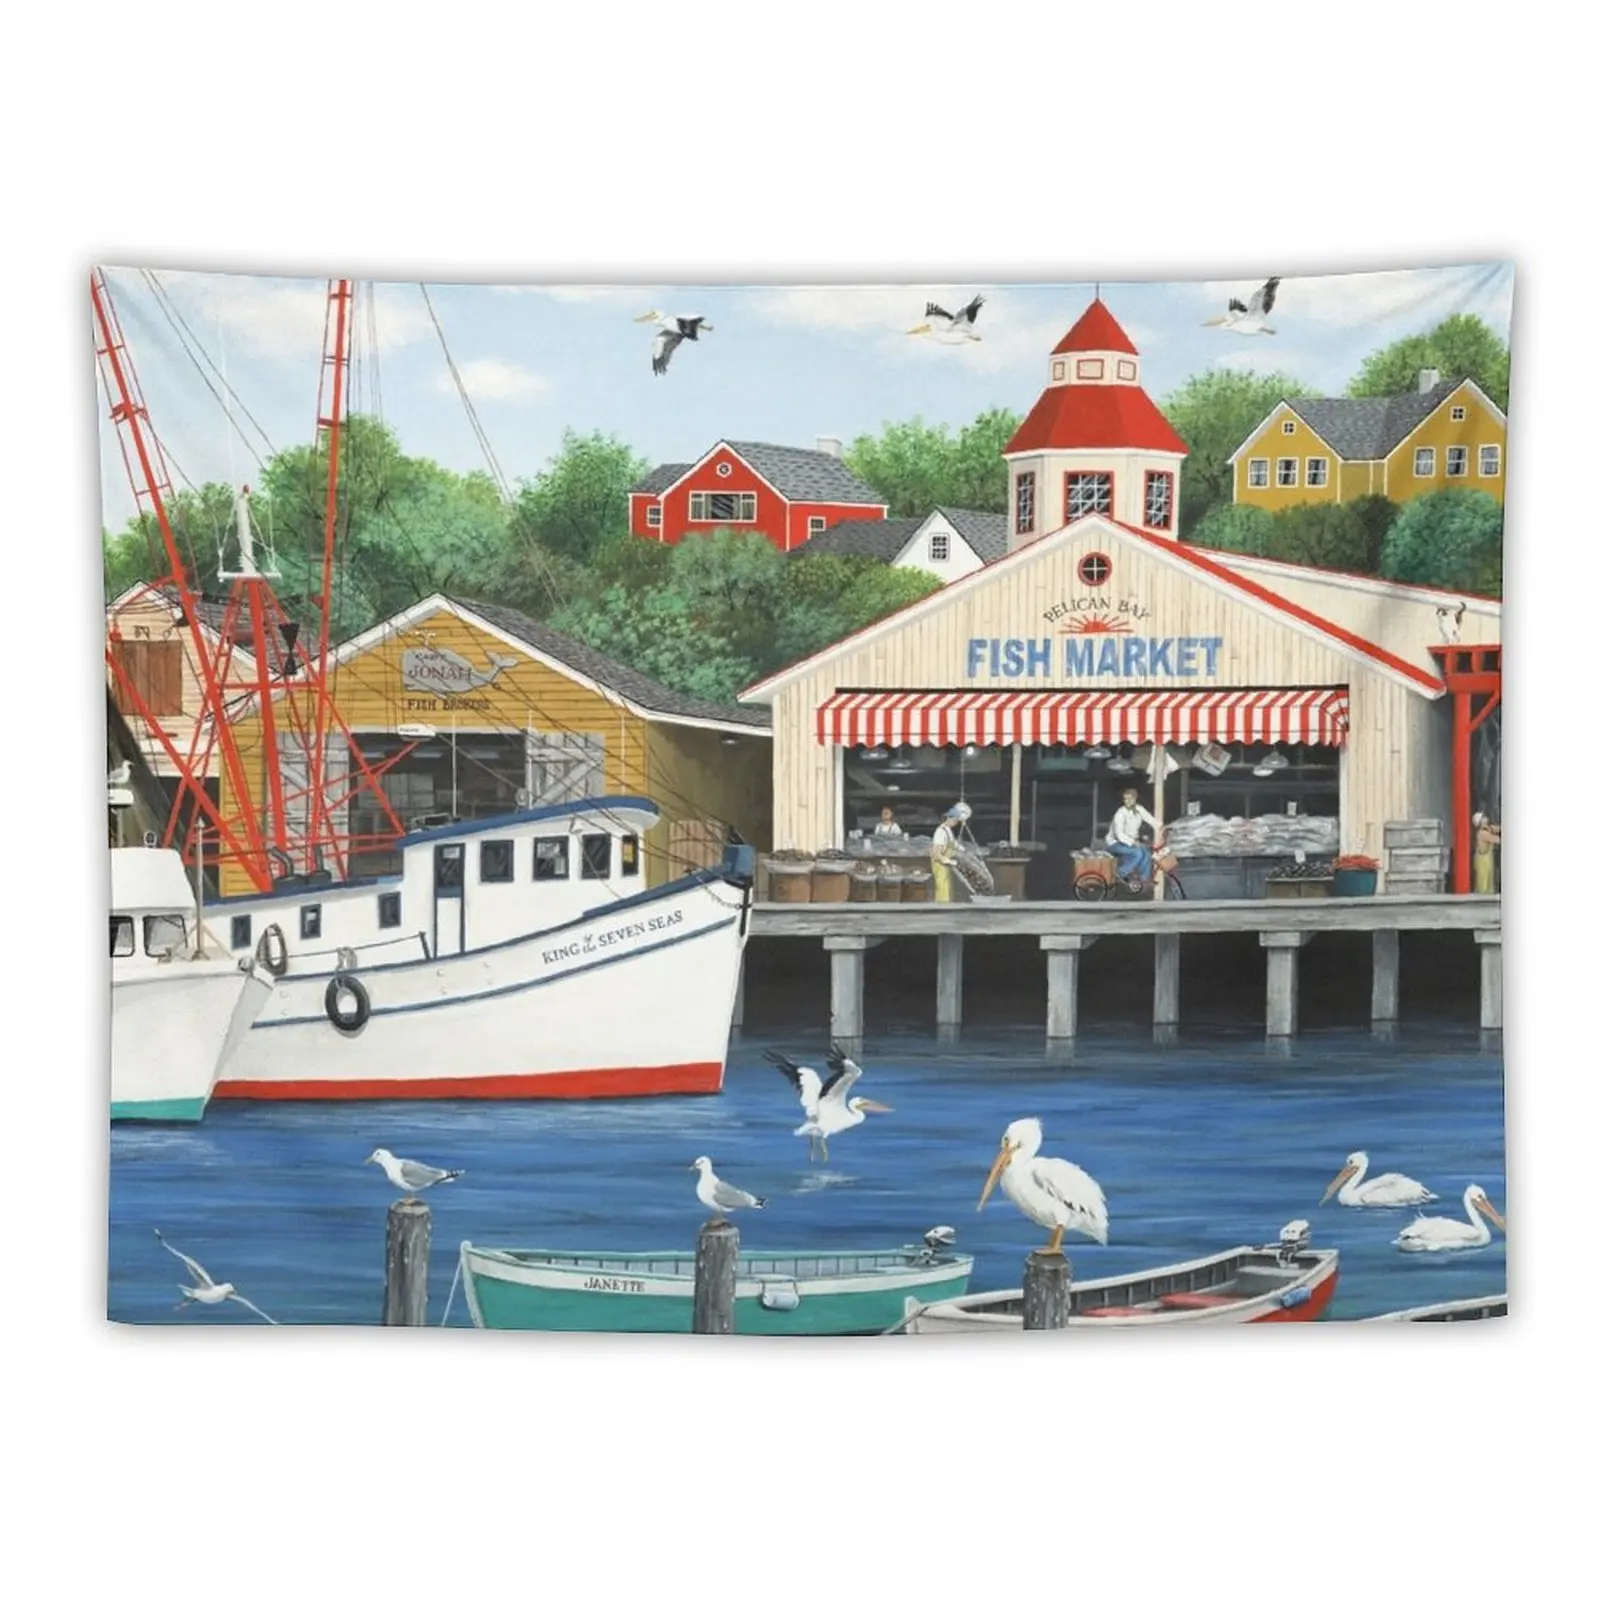 

Pelican Bay Tapestry Bedrooms Decorations Home Decorating Decoration Bedroom Korean Room Decor